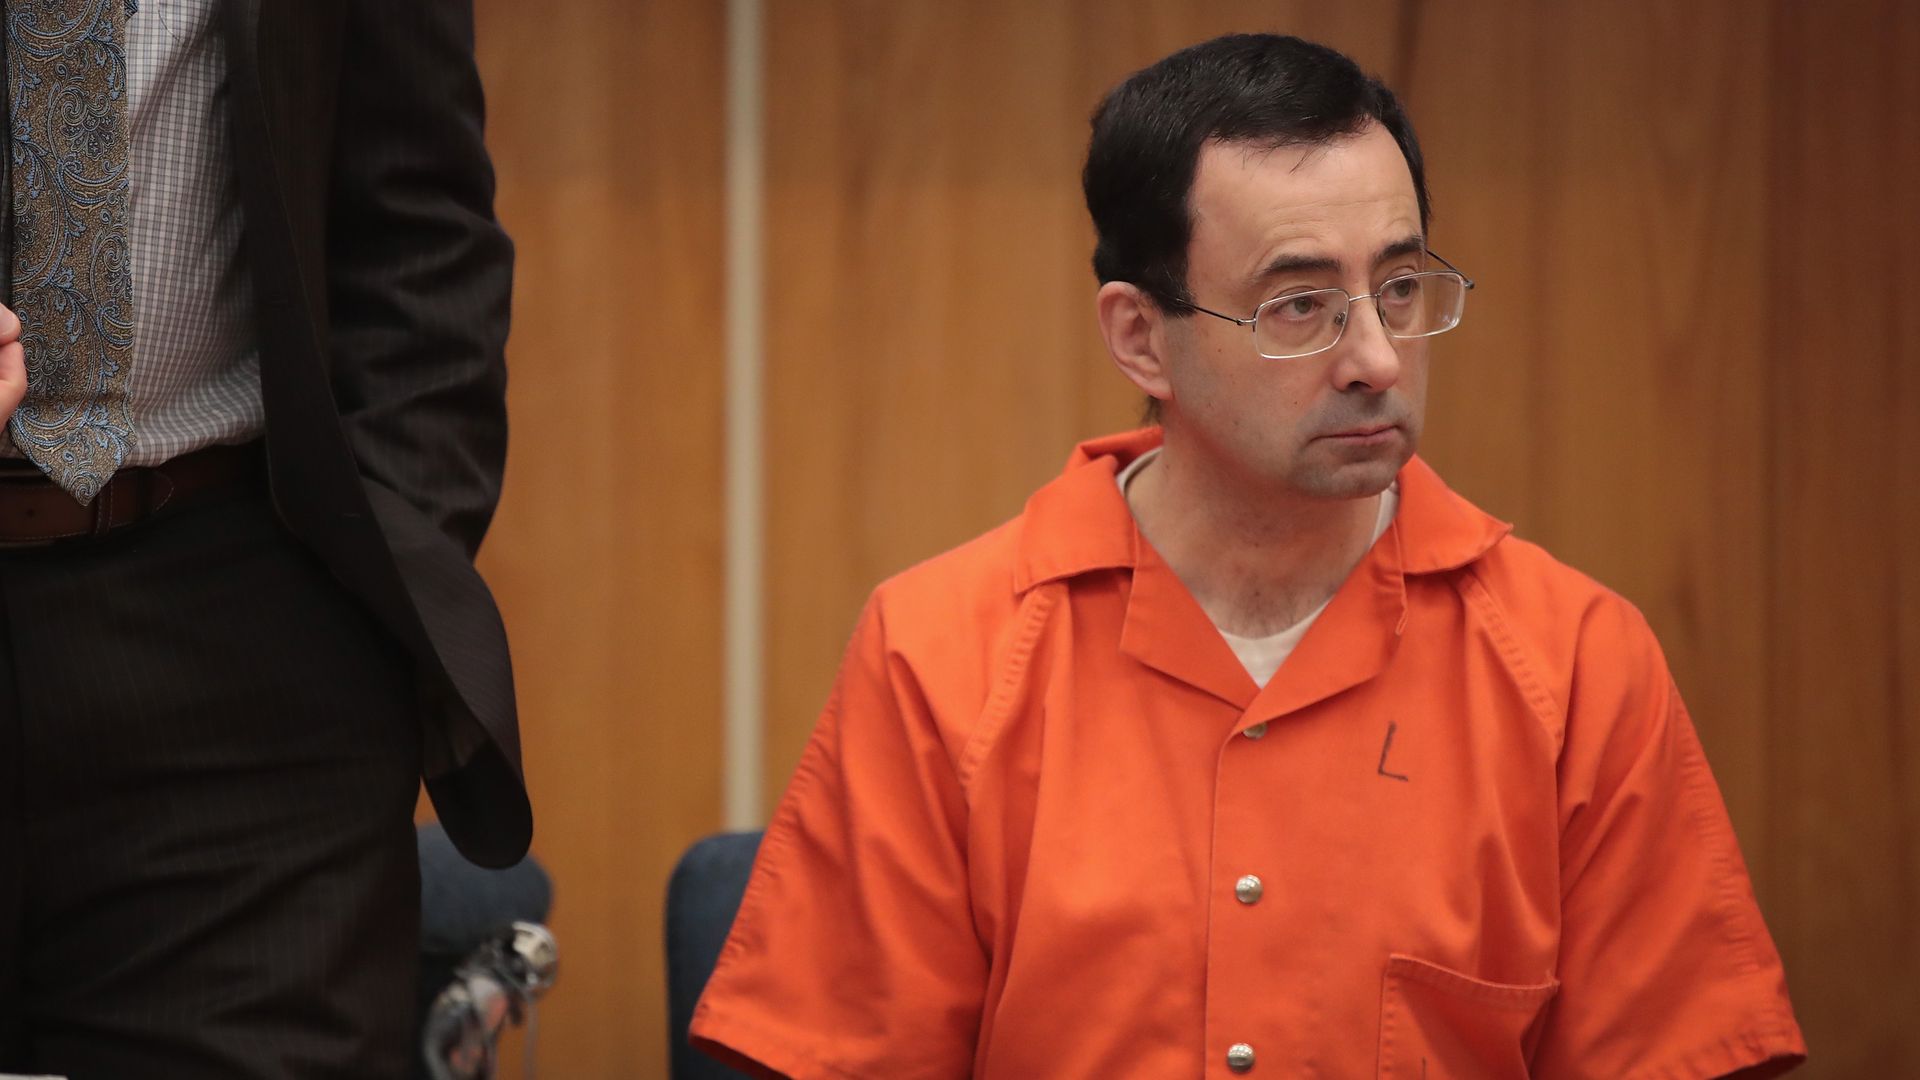 Larry Nassar sits in court listening to statements before being sentenced for three counts of criminal sexual assault on February 5, 2018 in Charlotte, Michigan